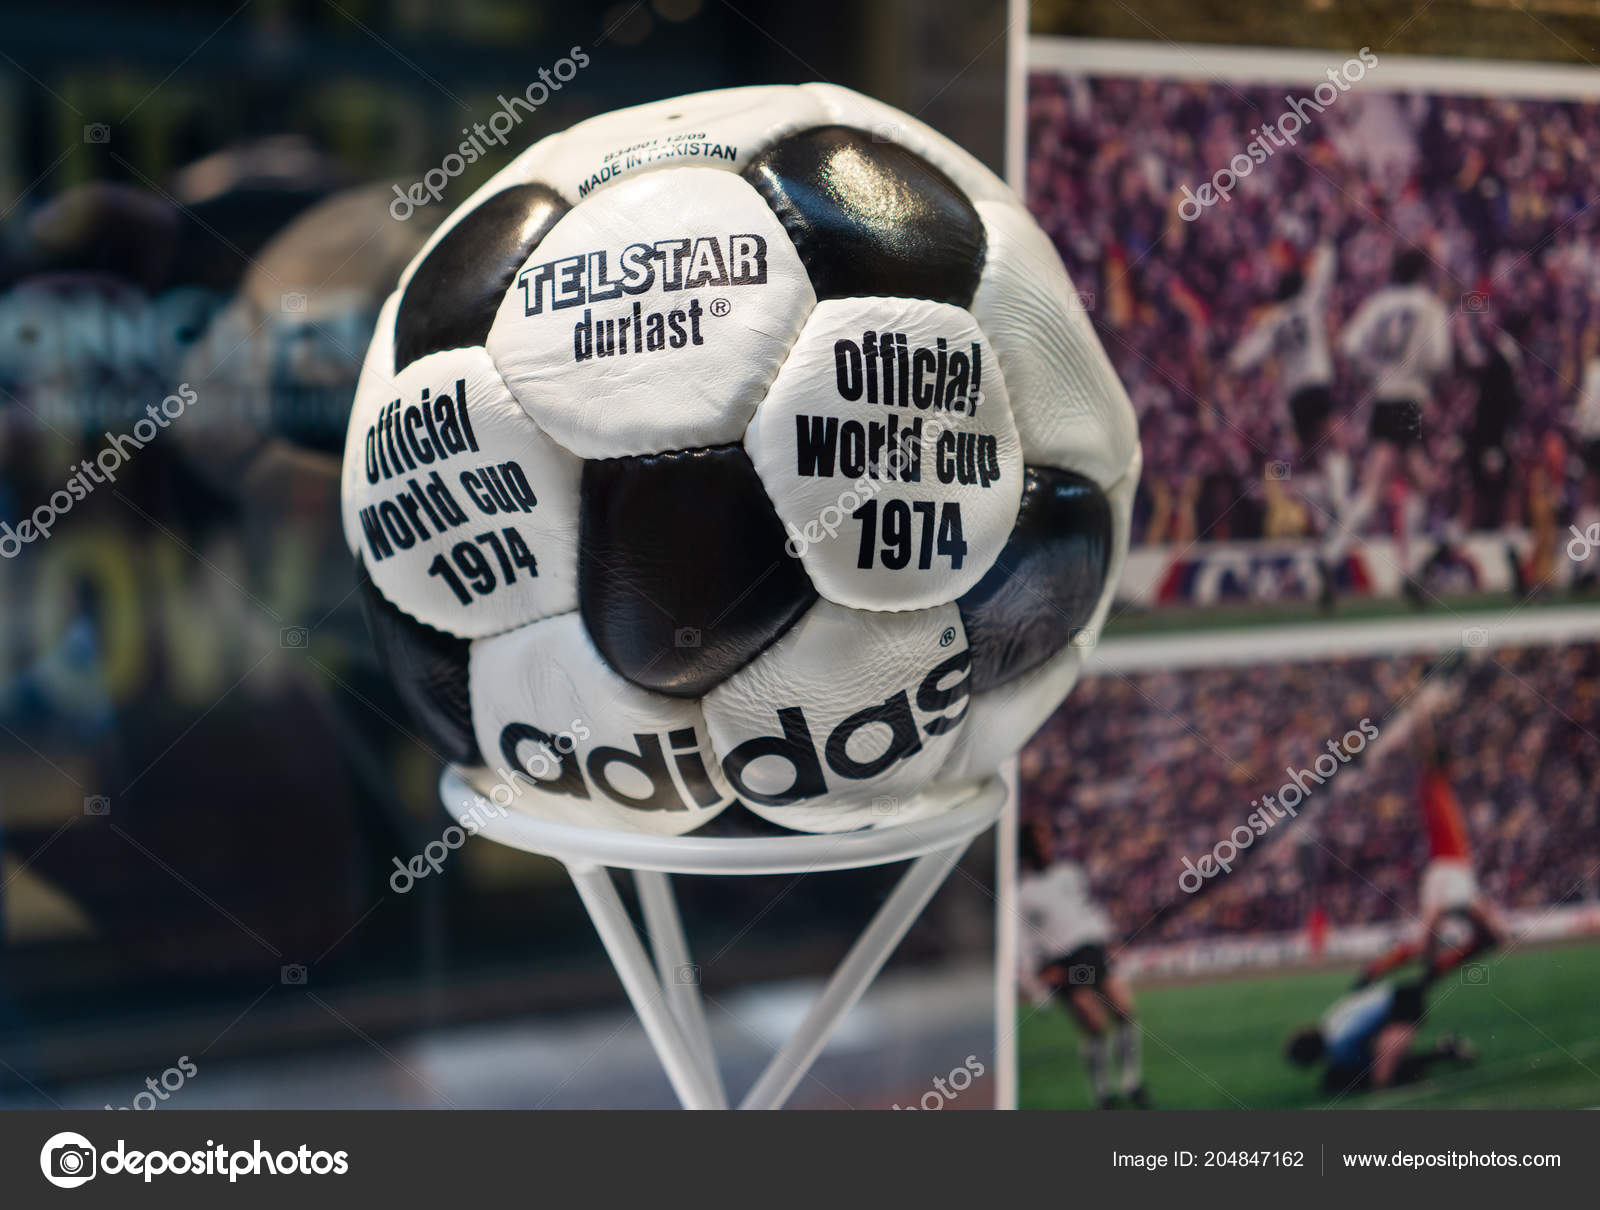 July 2018 Moscow Russia Official Ball Fifa World Cup 1974 Editorial Photo qwer230586@yandex.ru